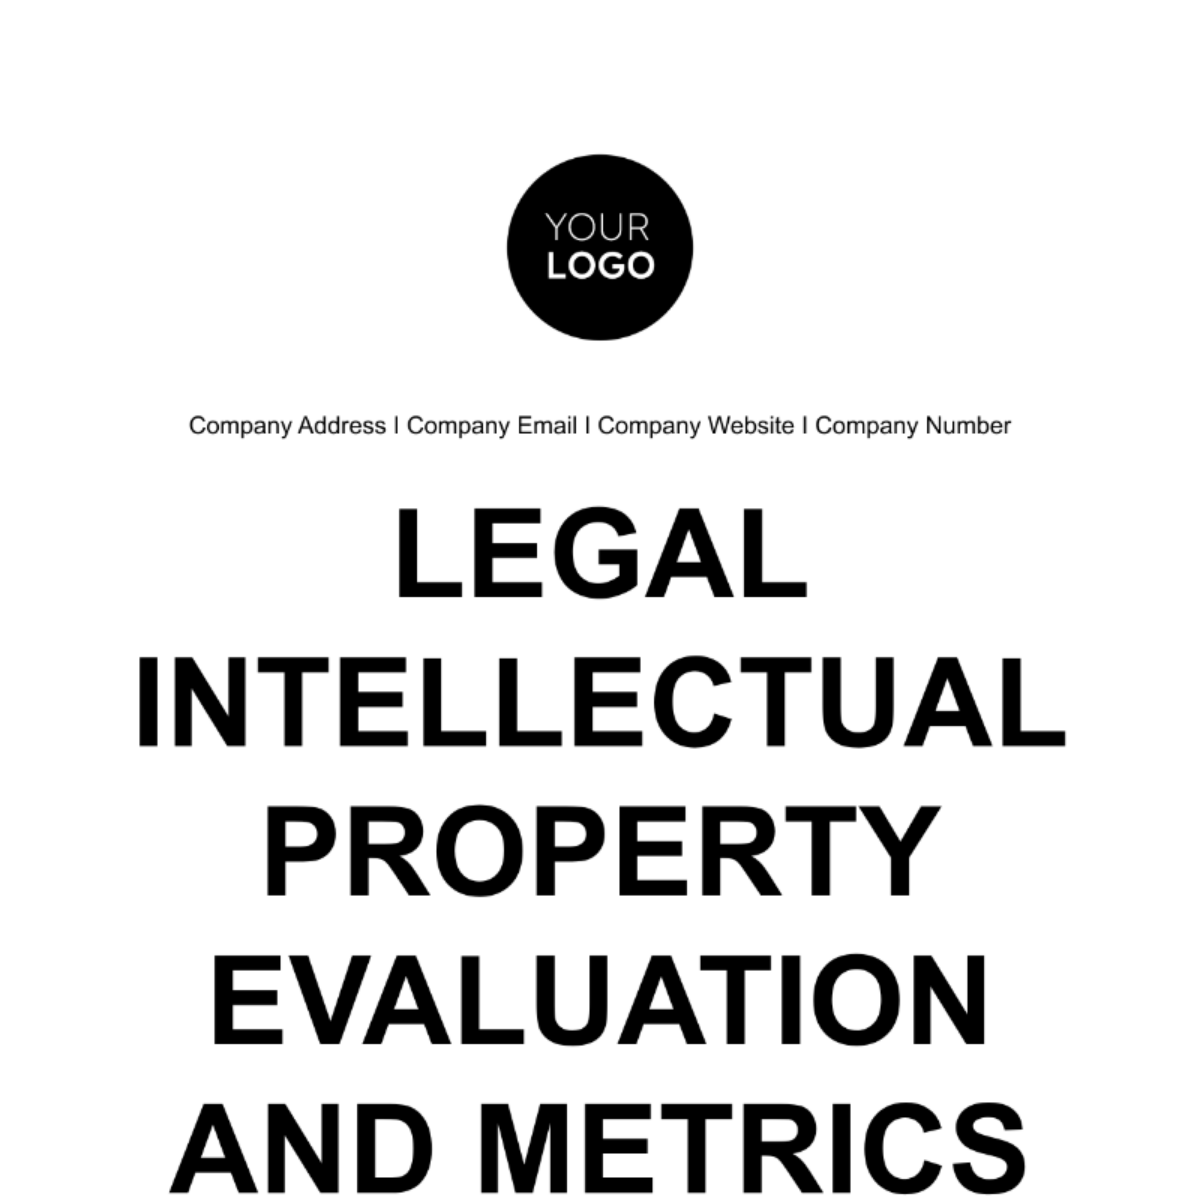 Free Legal Intellectual Property Evaluation and Metrics Manual Template